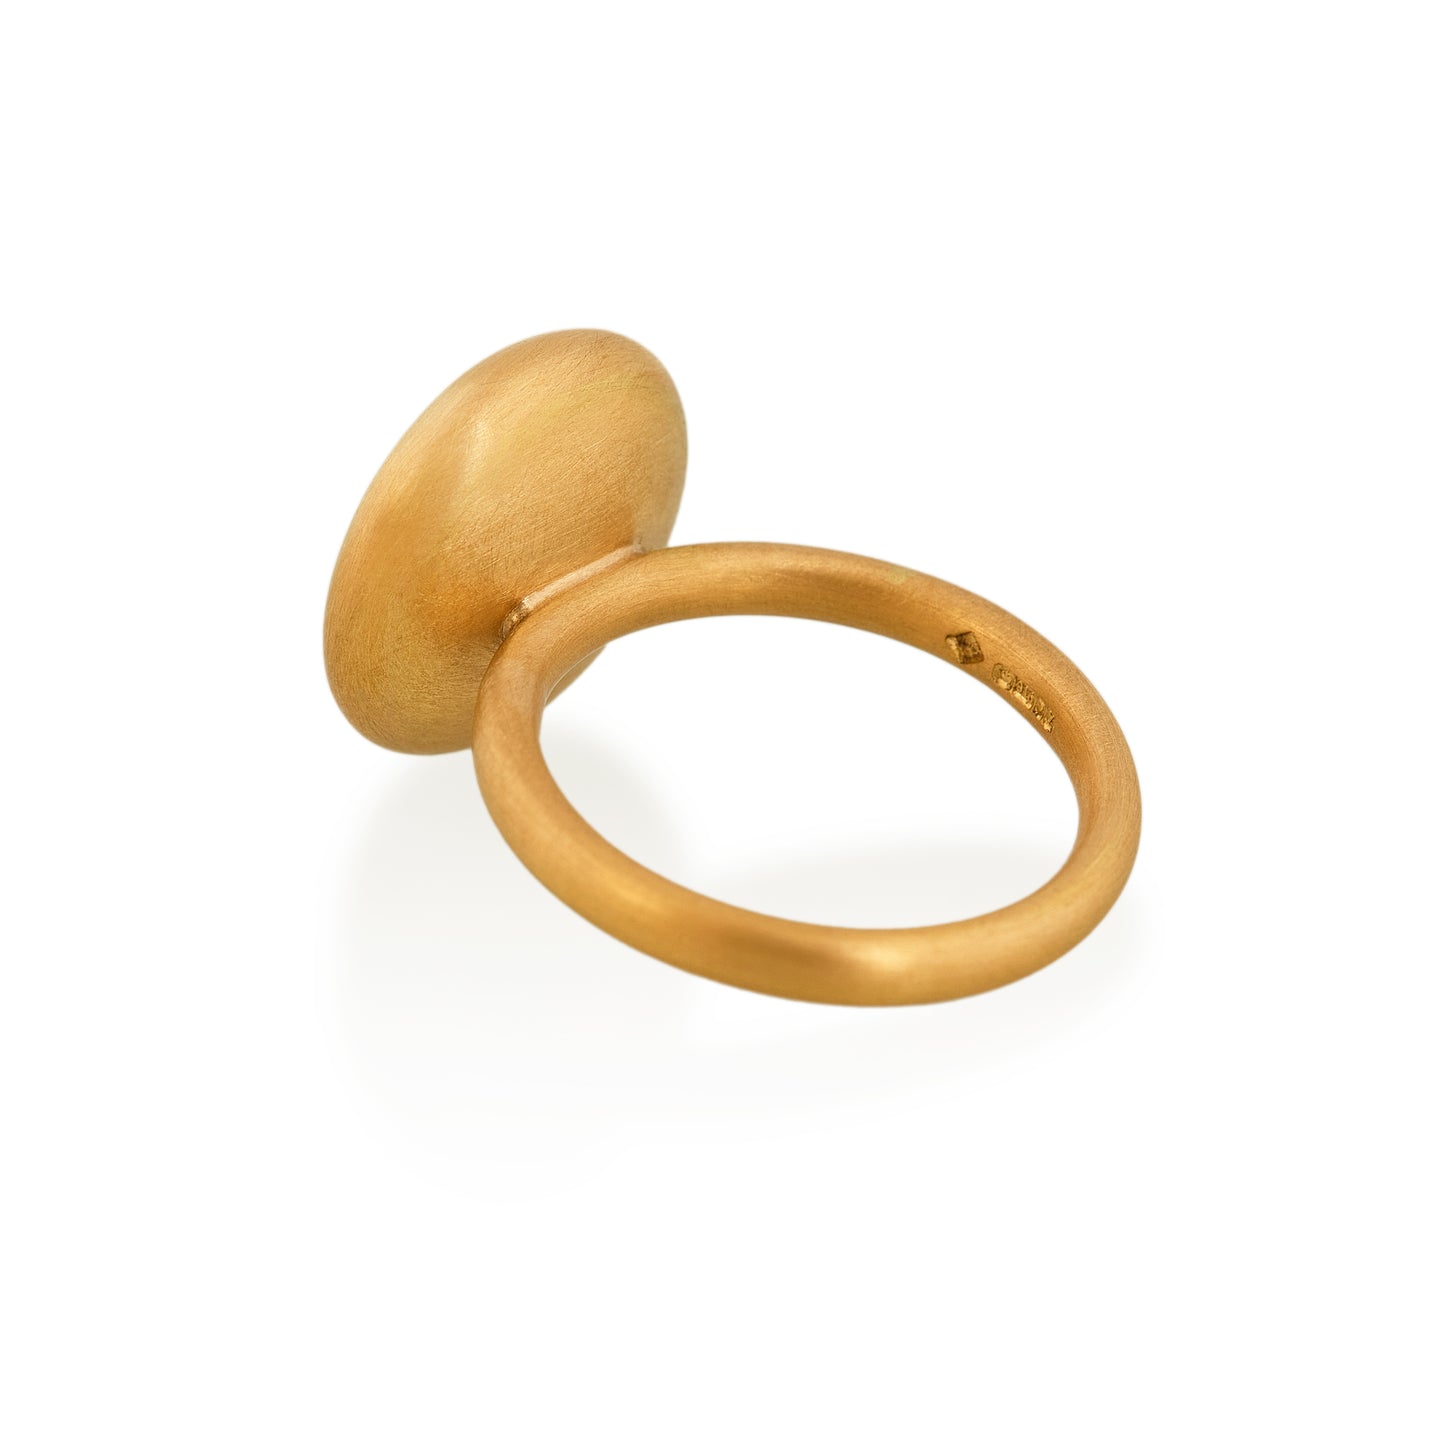 Round Antique Coral Ring, 22ct Gold